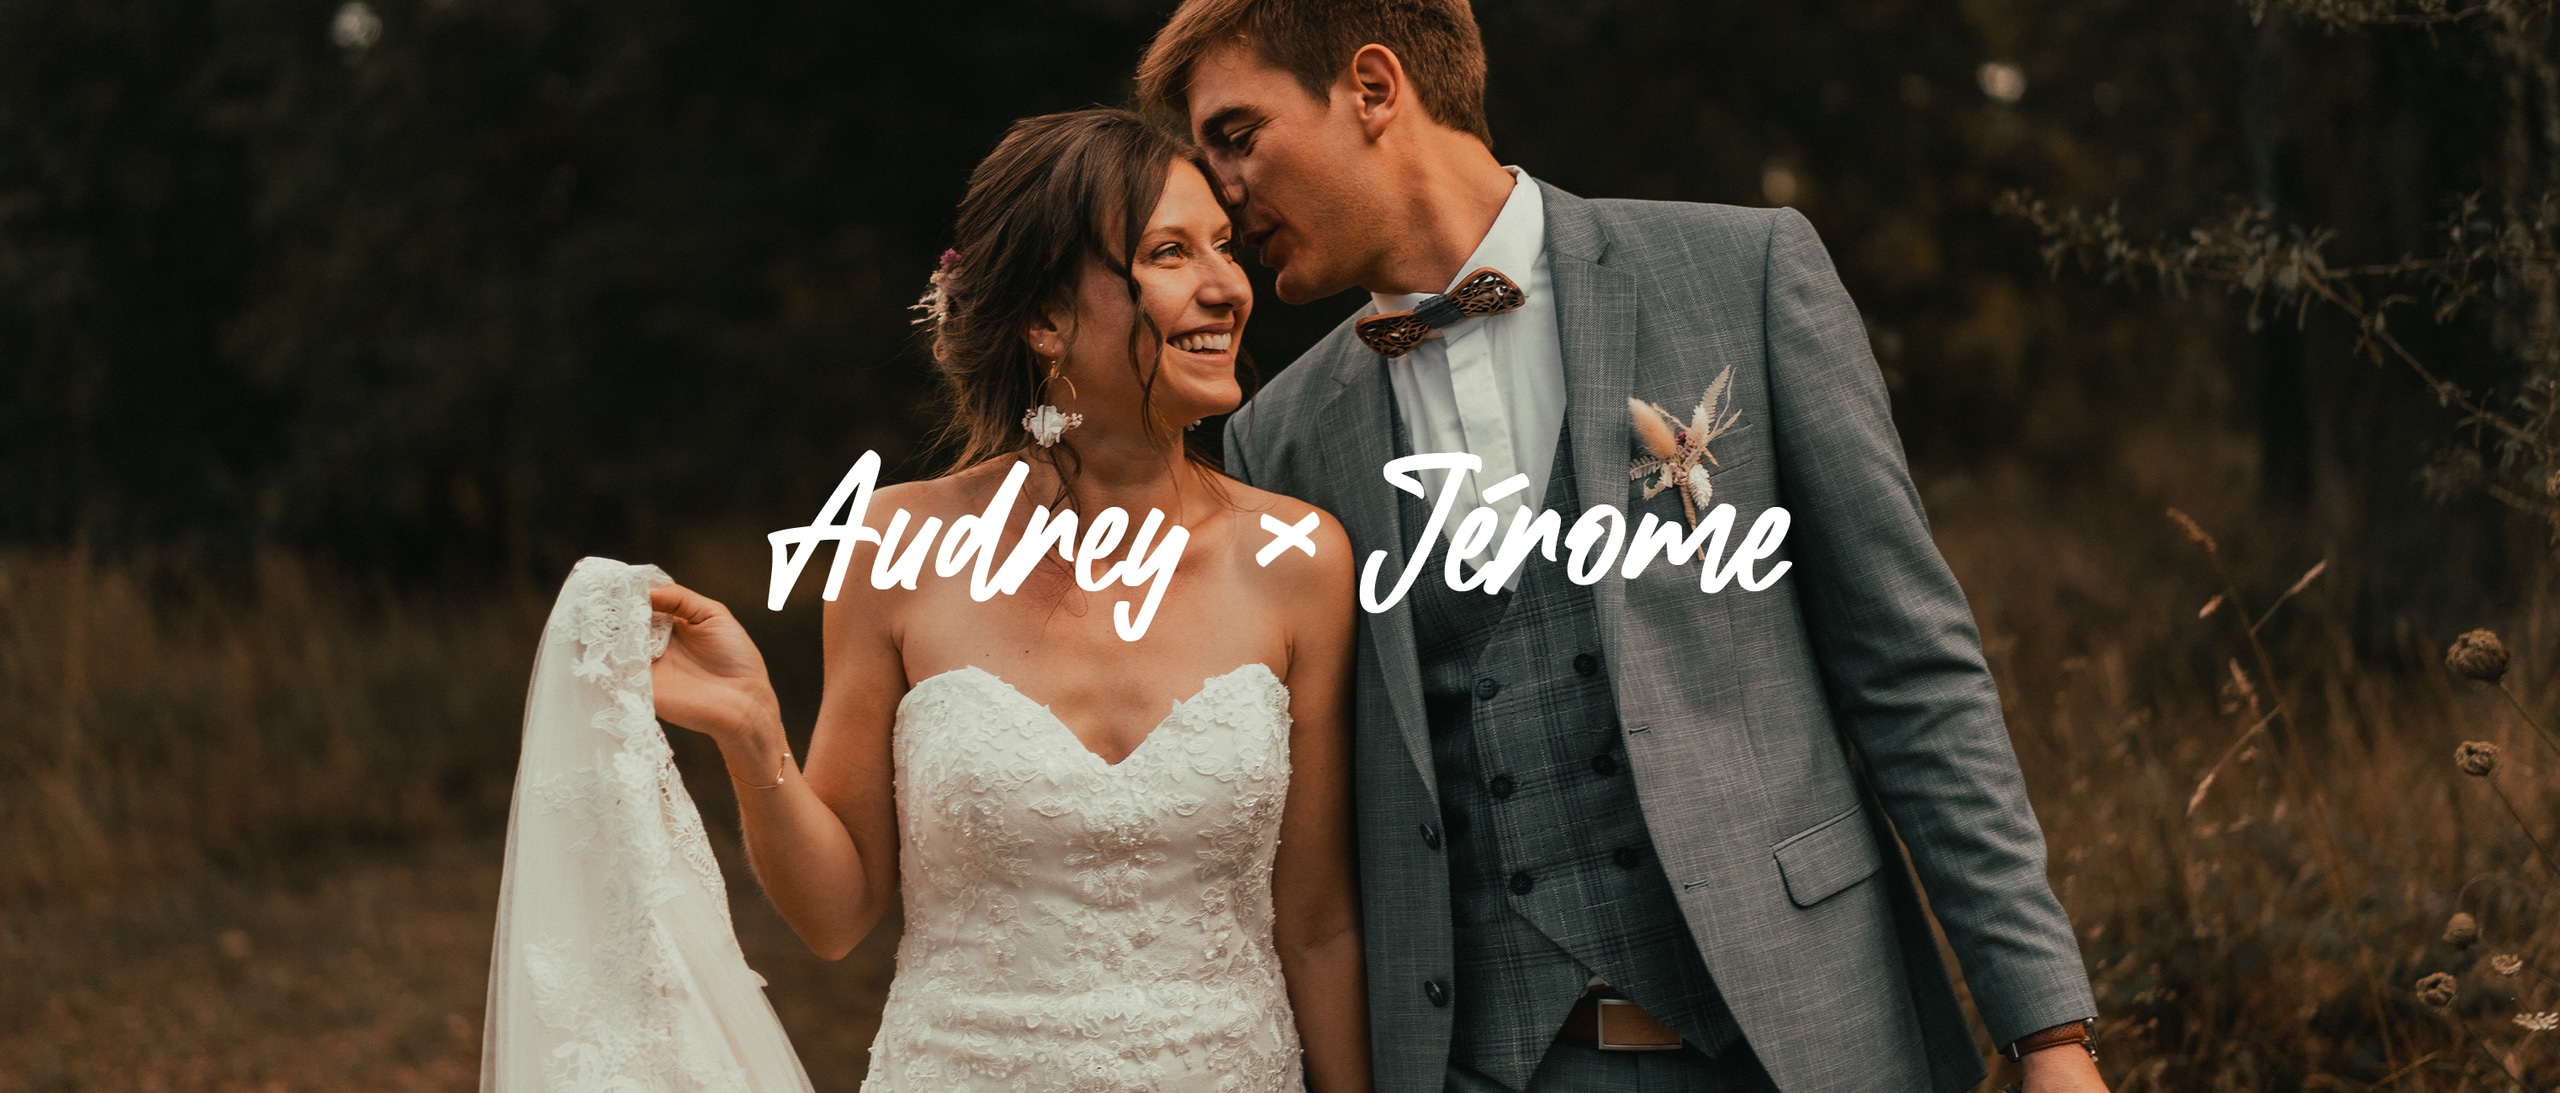 audrey-jerome_mariage_preview_02